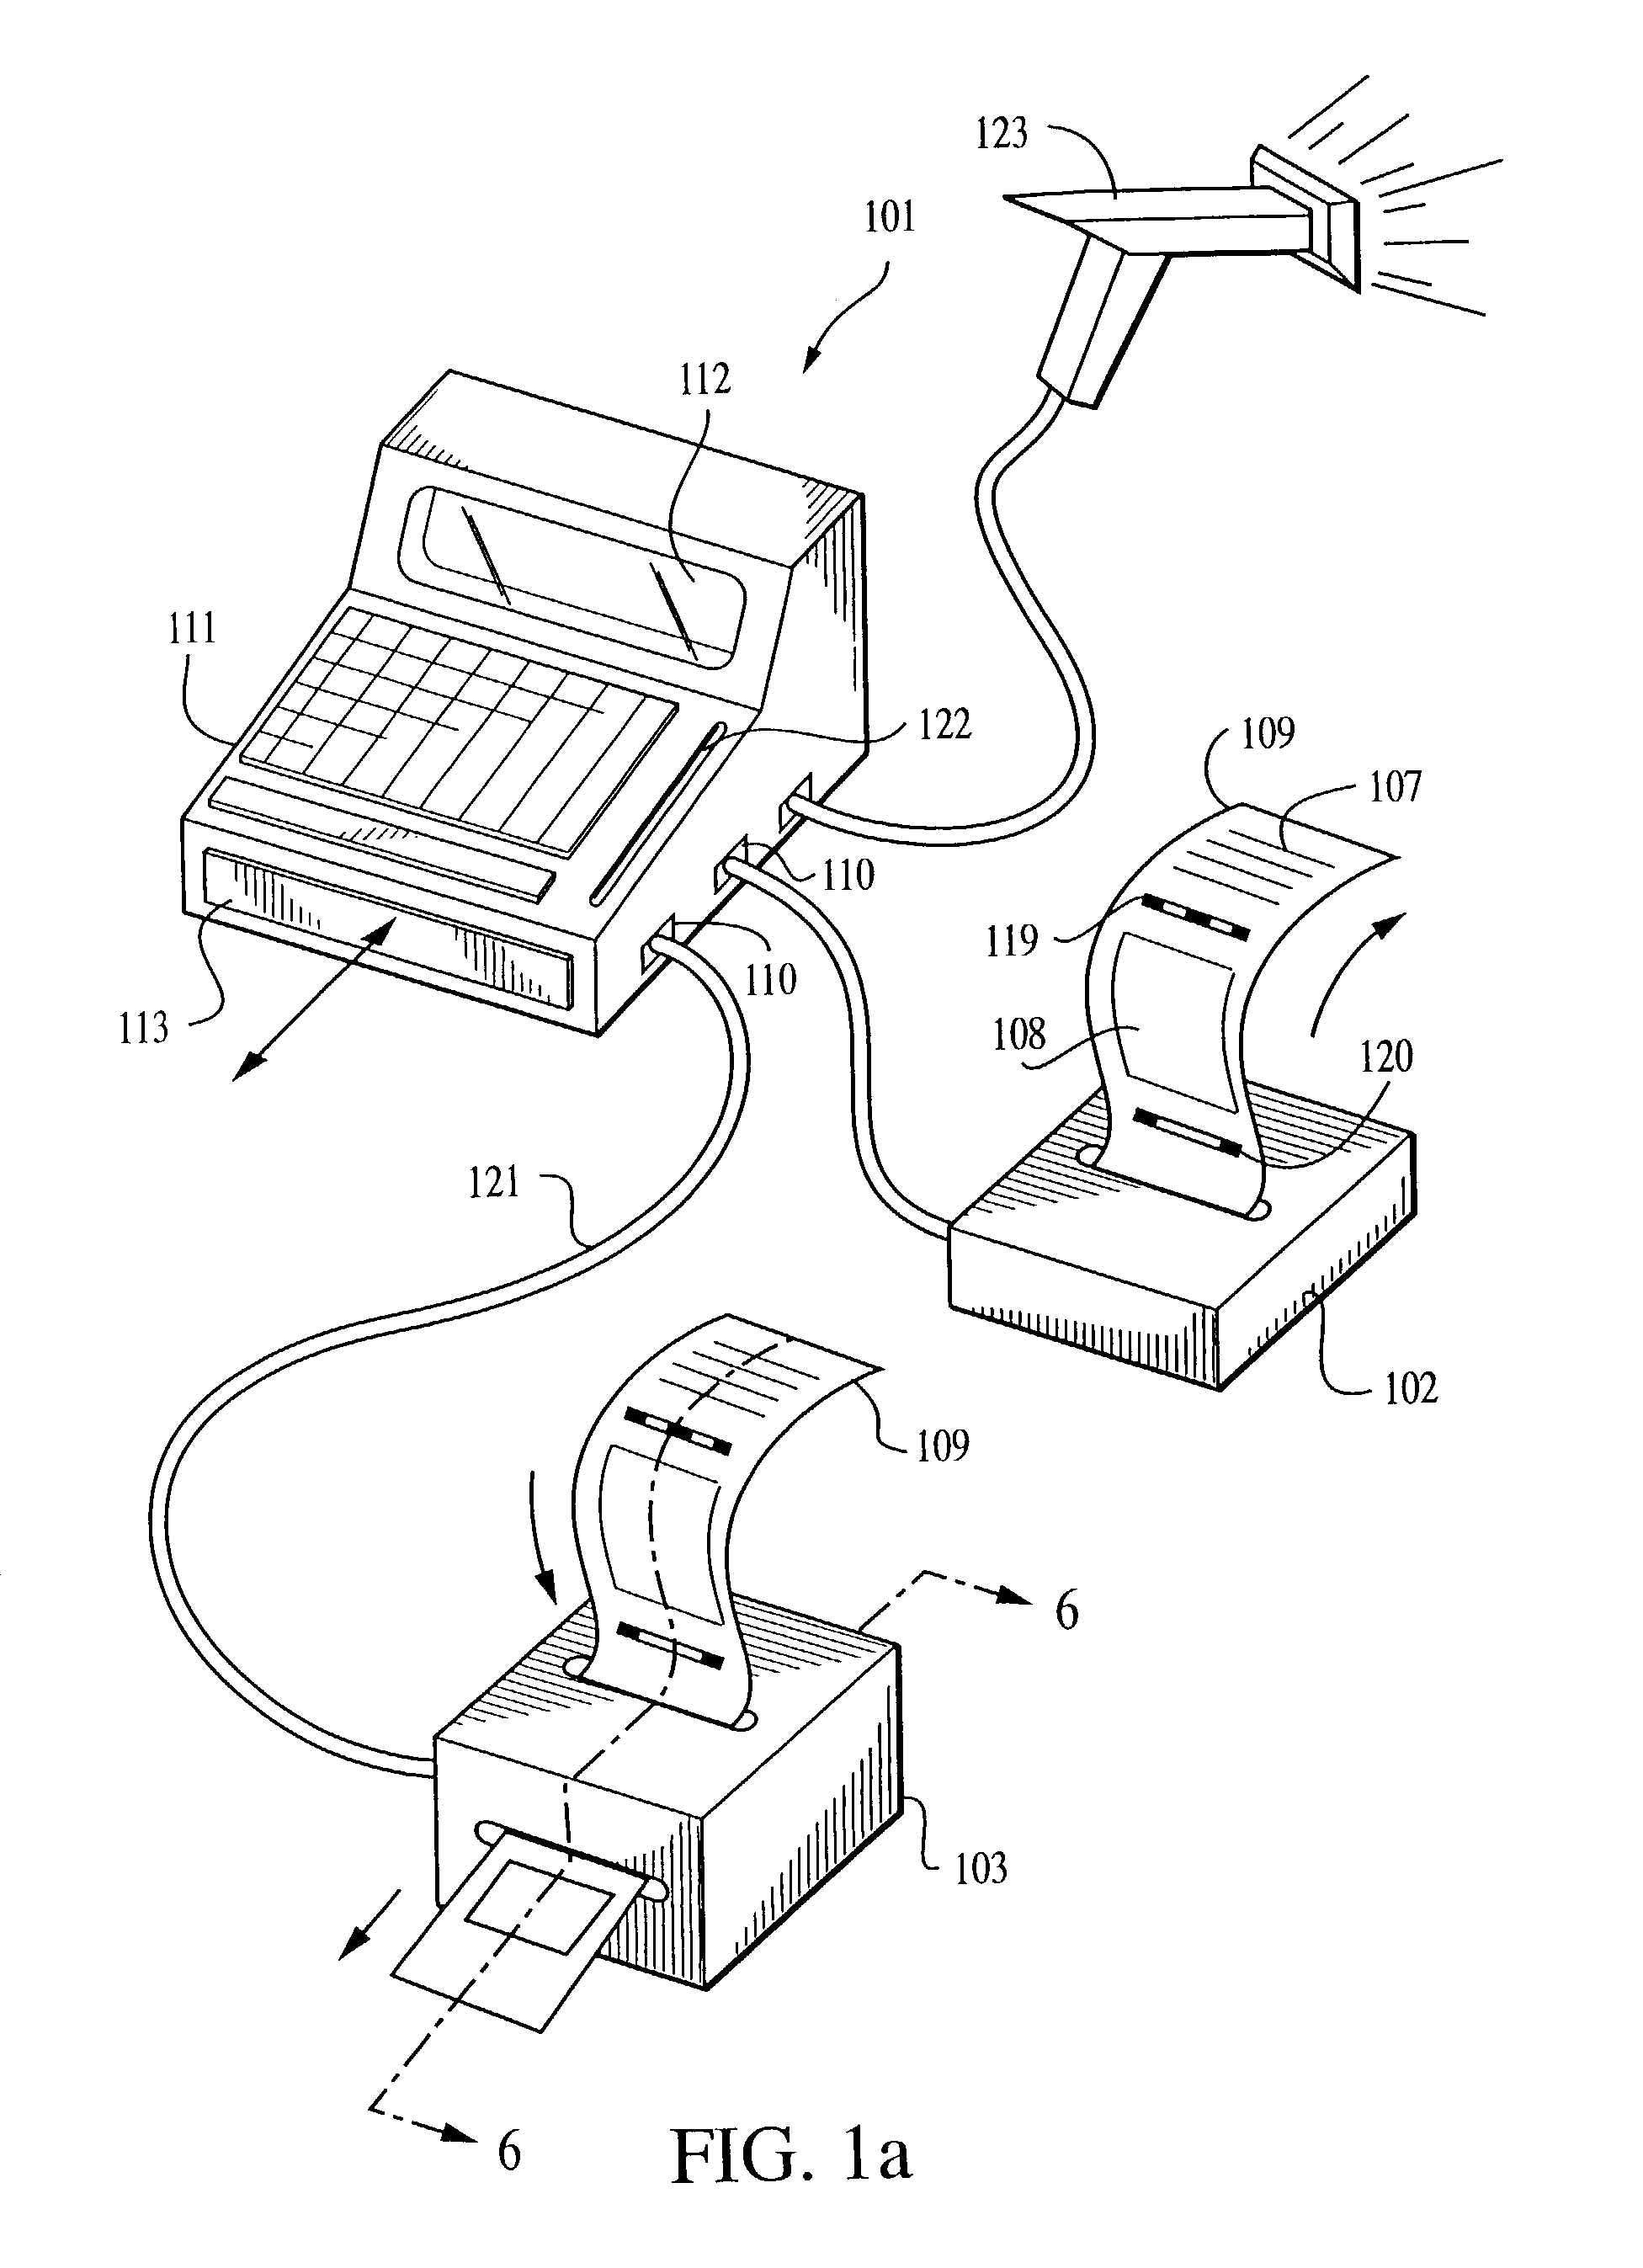 Method and apparatus for transferring and processing transaction data